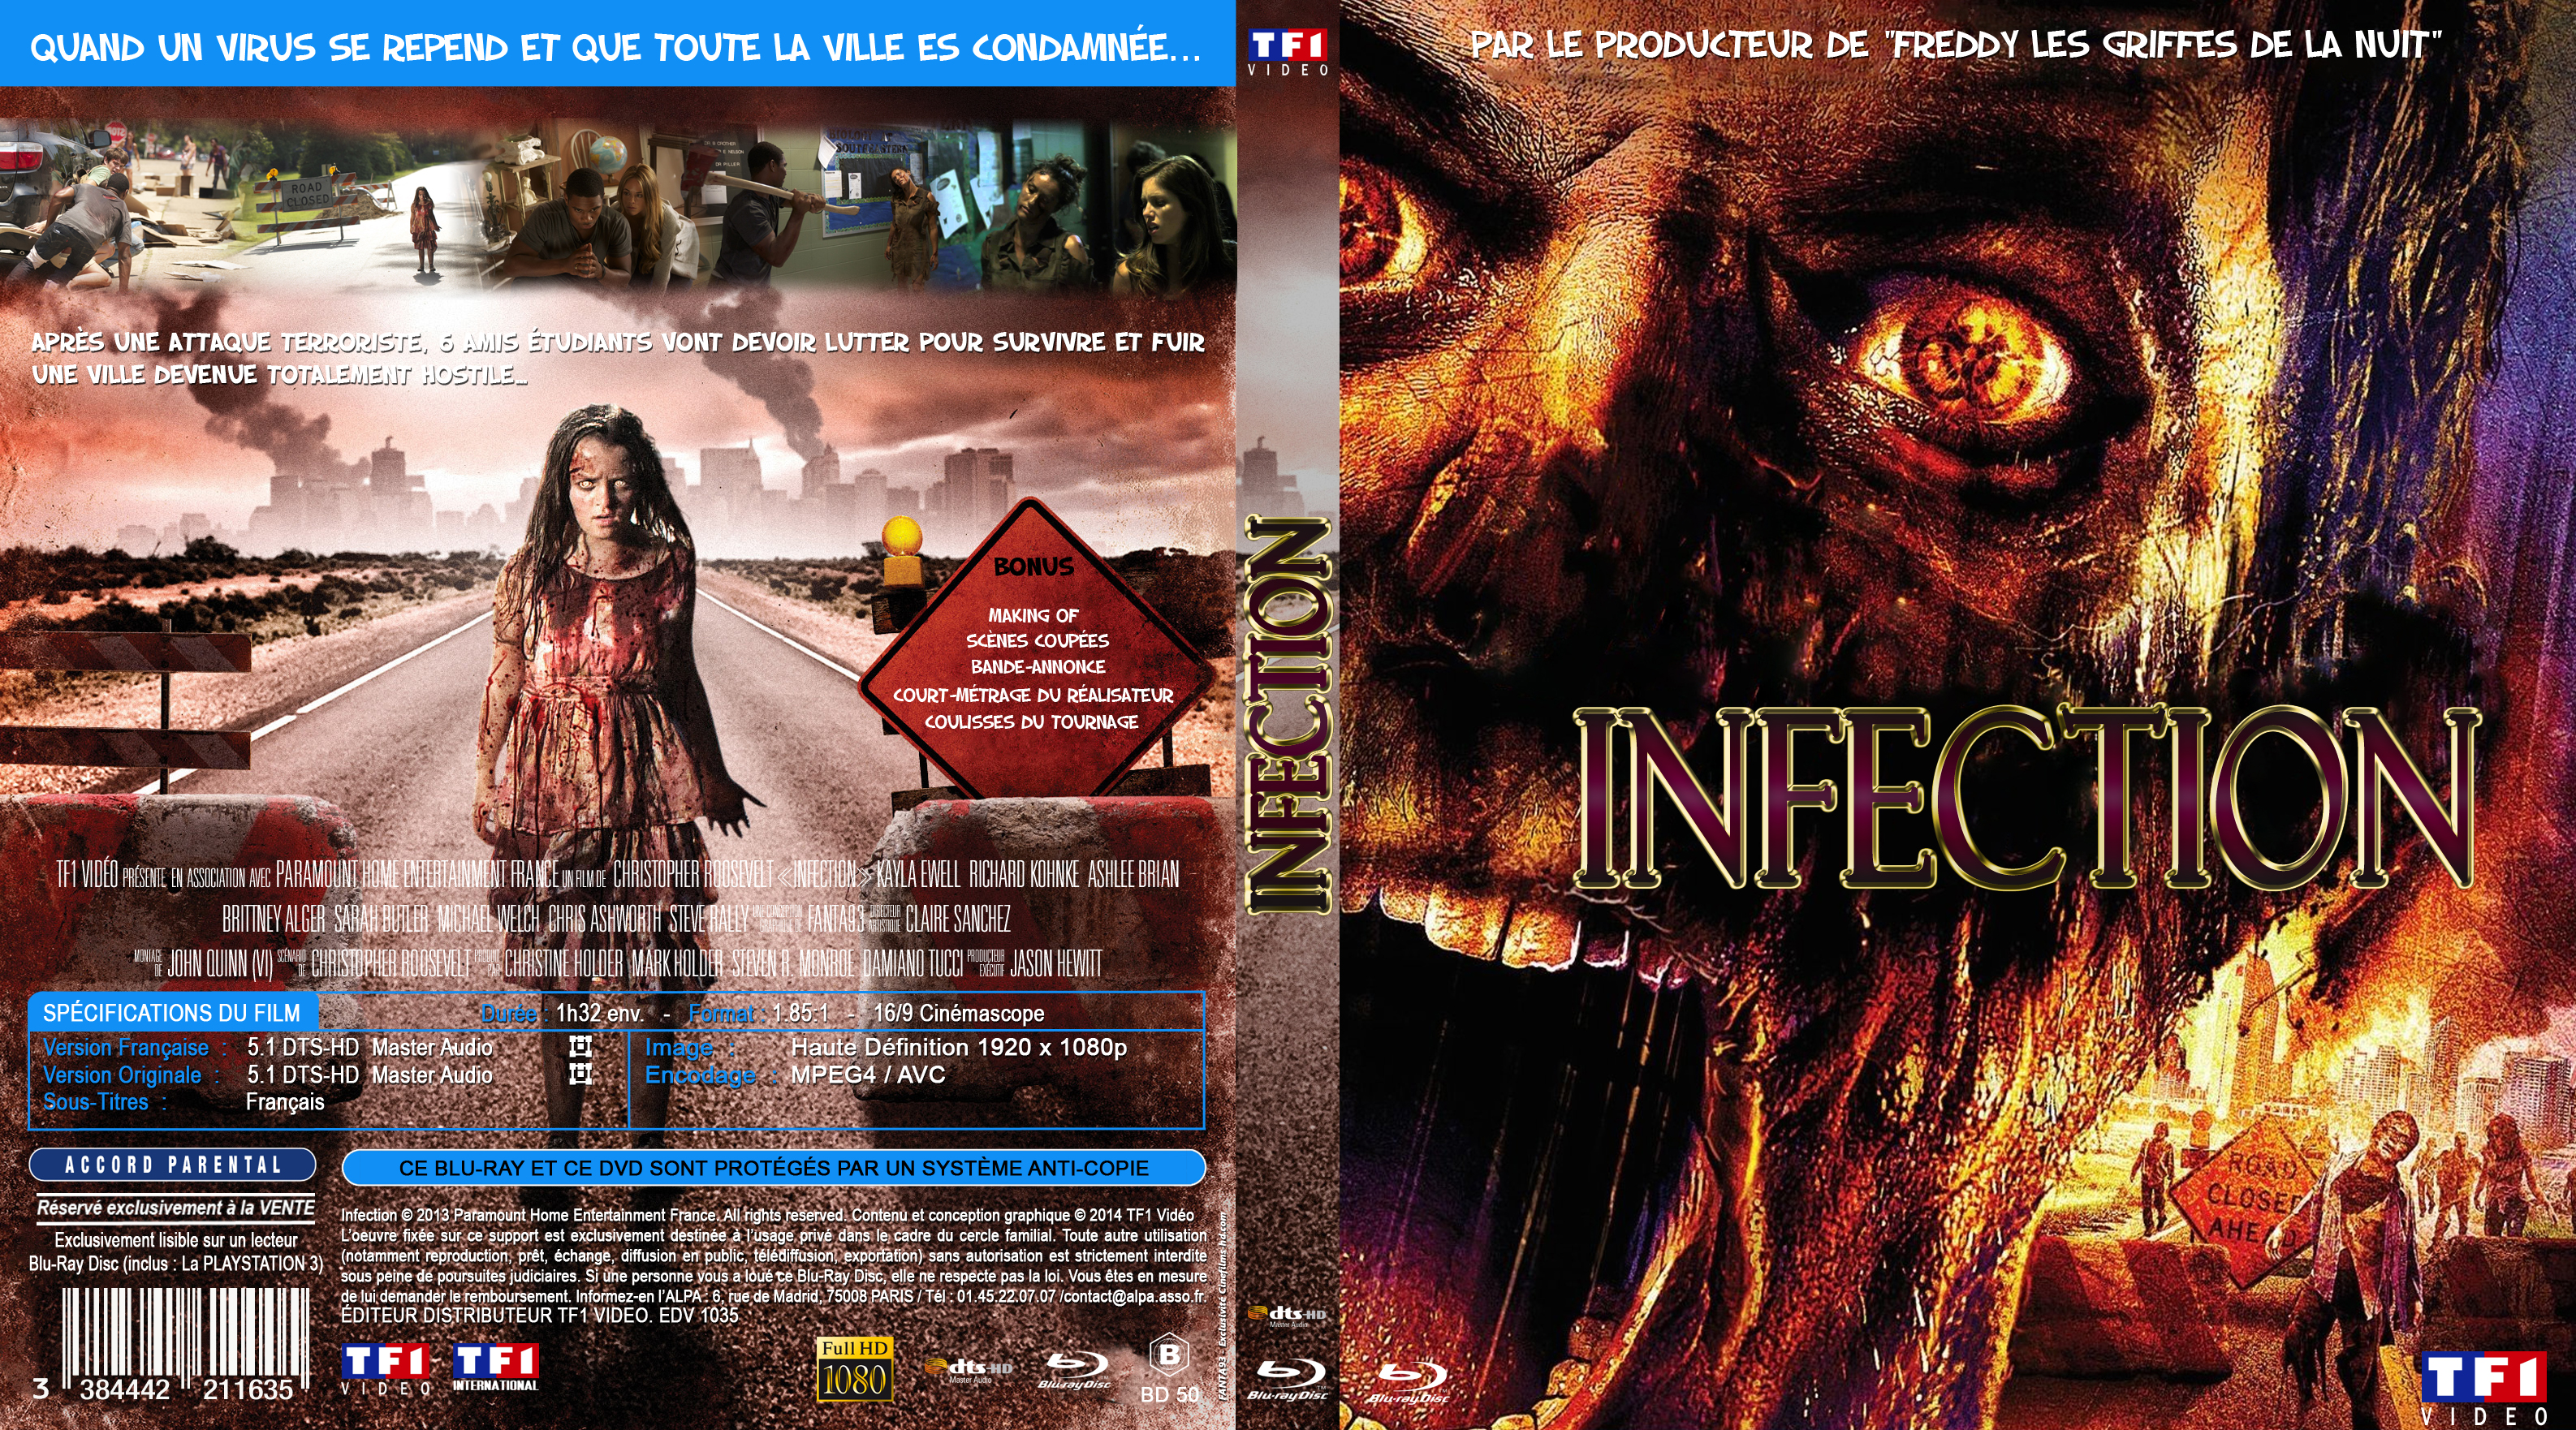 Jaquette DVD Infection custom (BLU-RAY)